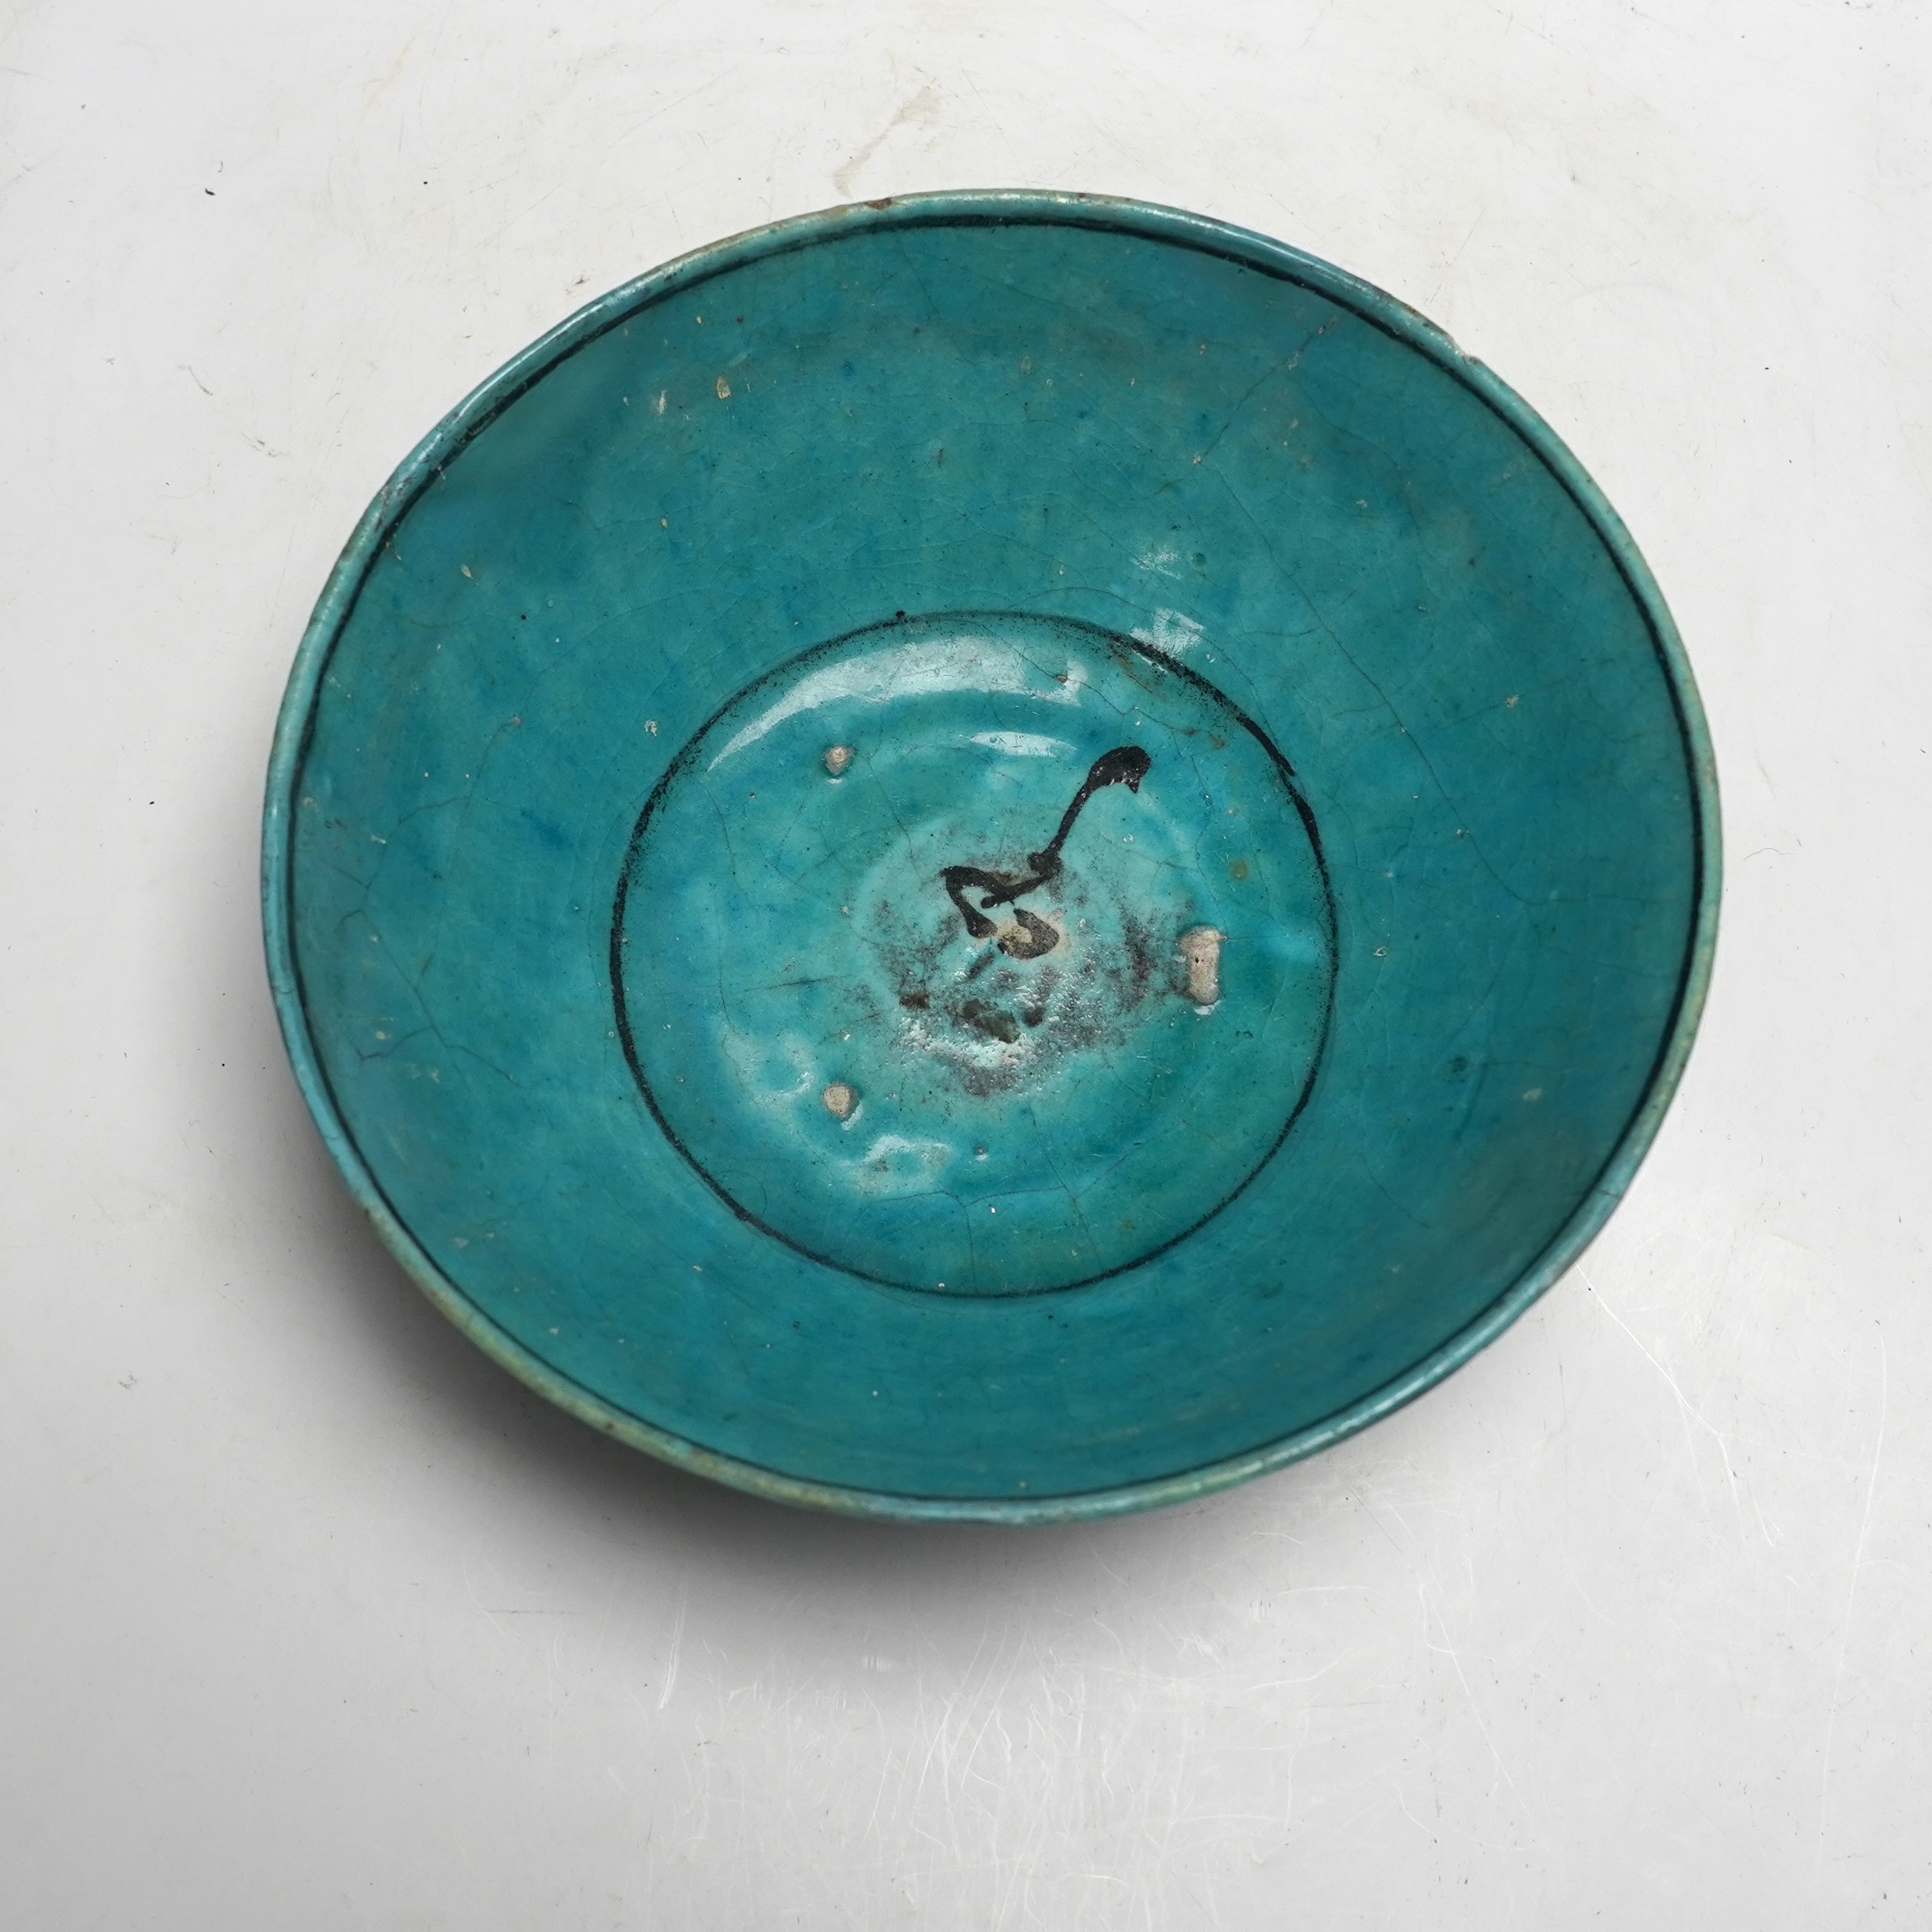 A Kashan turquoise glazed fritware bowl, Persia, 13th/14th century, 25cm diameter